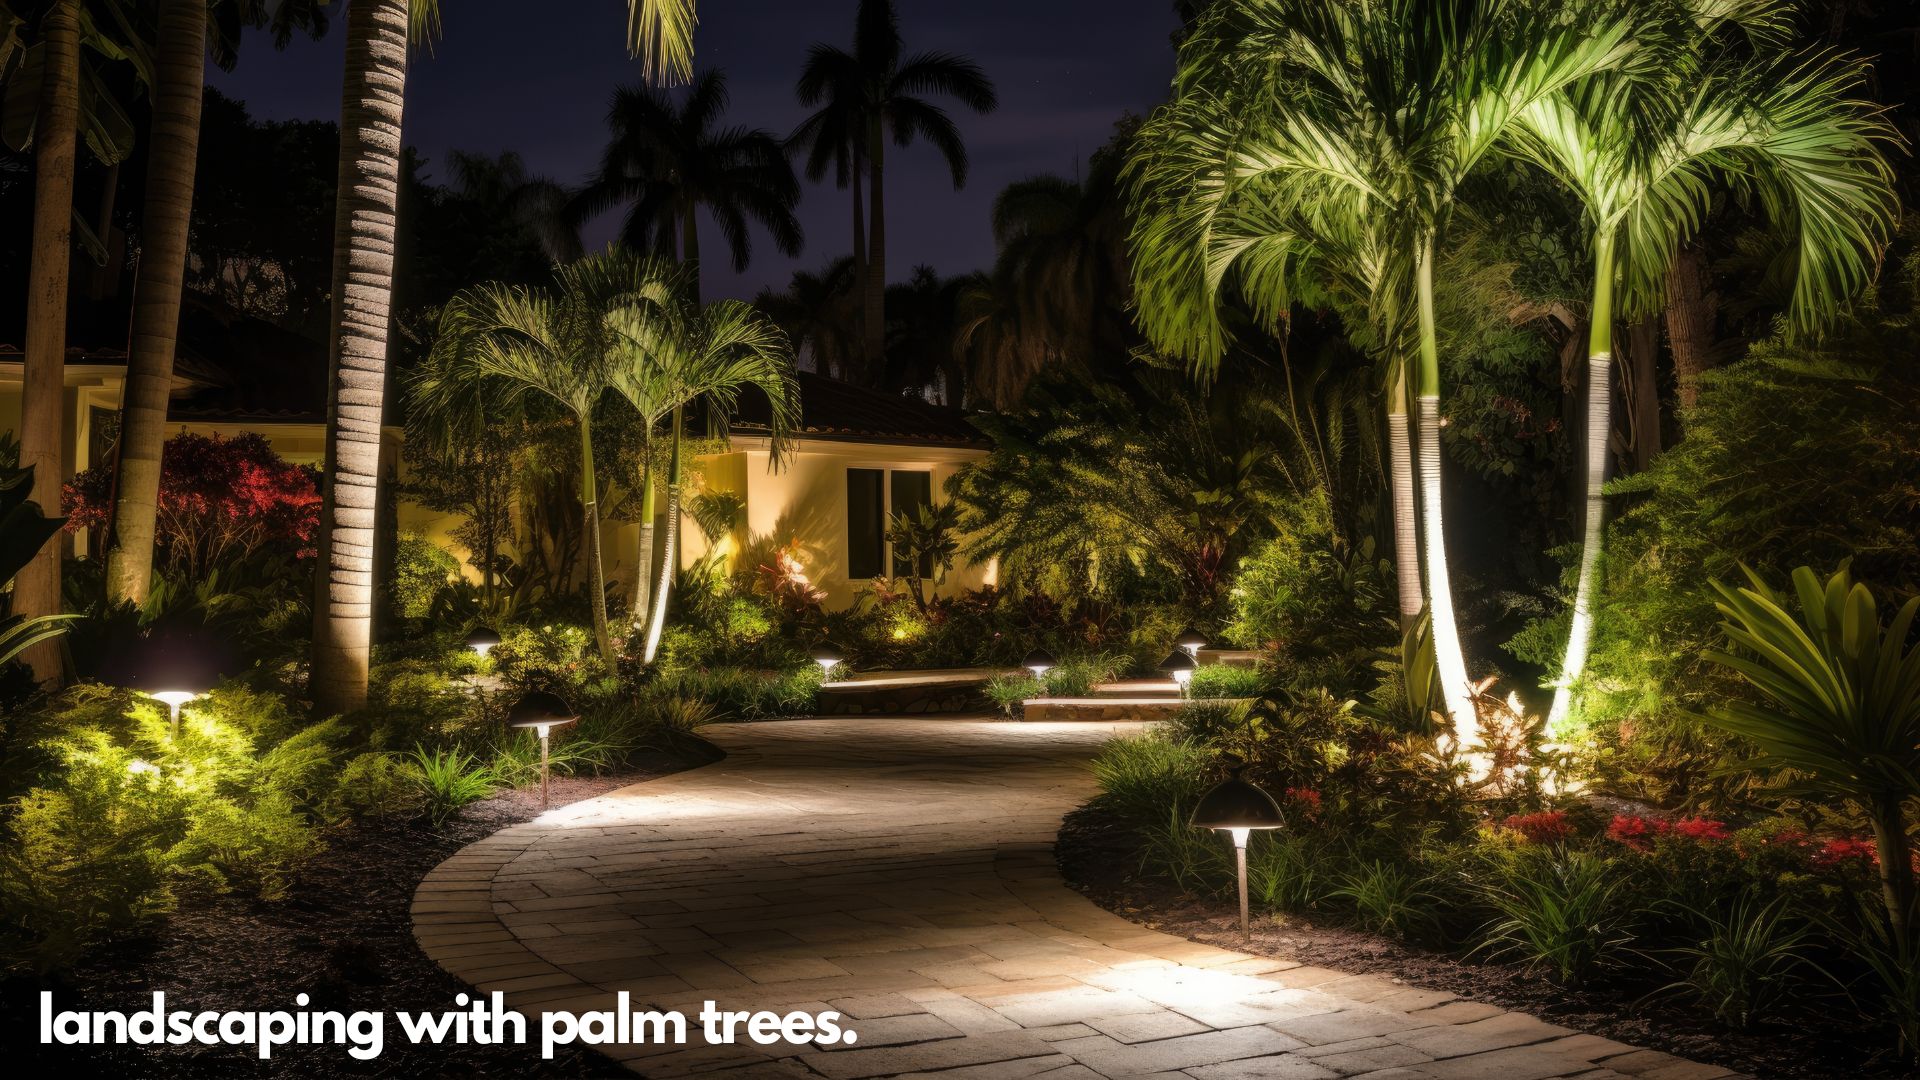 Outdoor space with palm trees